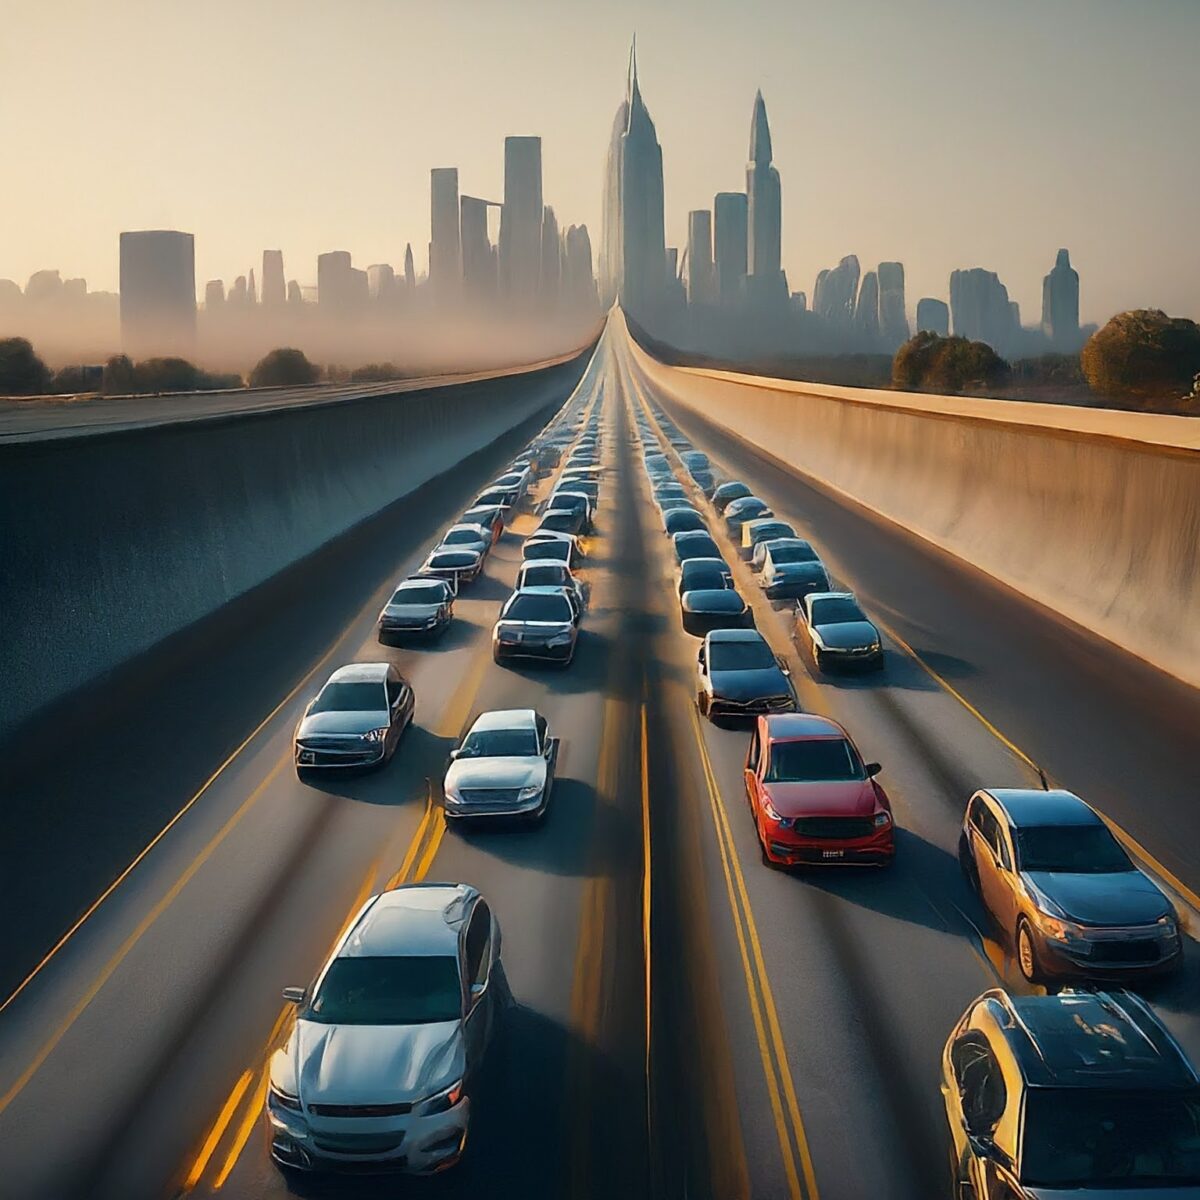 An image of cars leaving a city